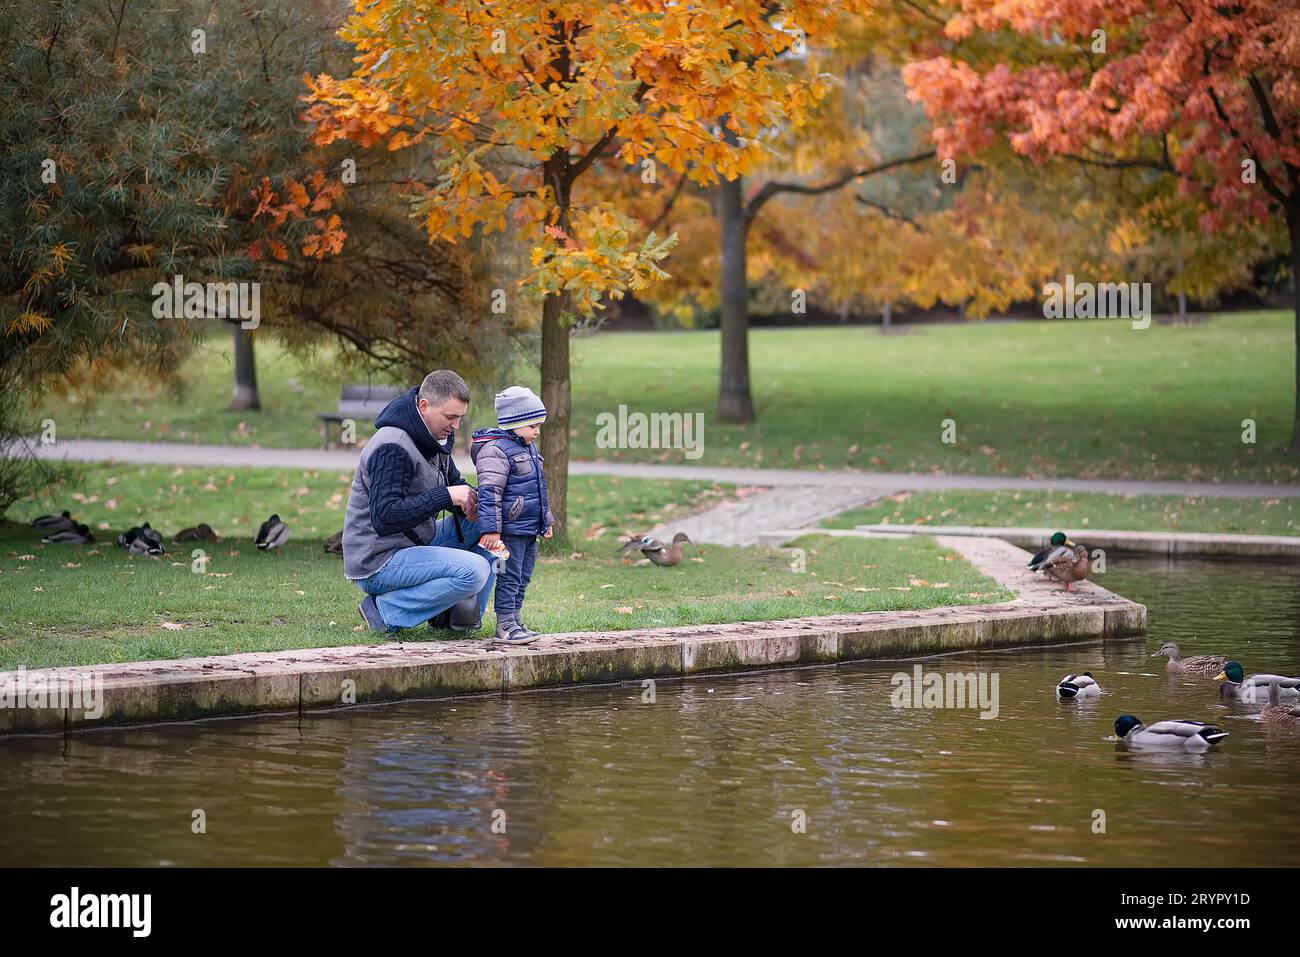 Father and son feed ducks on a pond in the autumn park Stock Photo